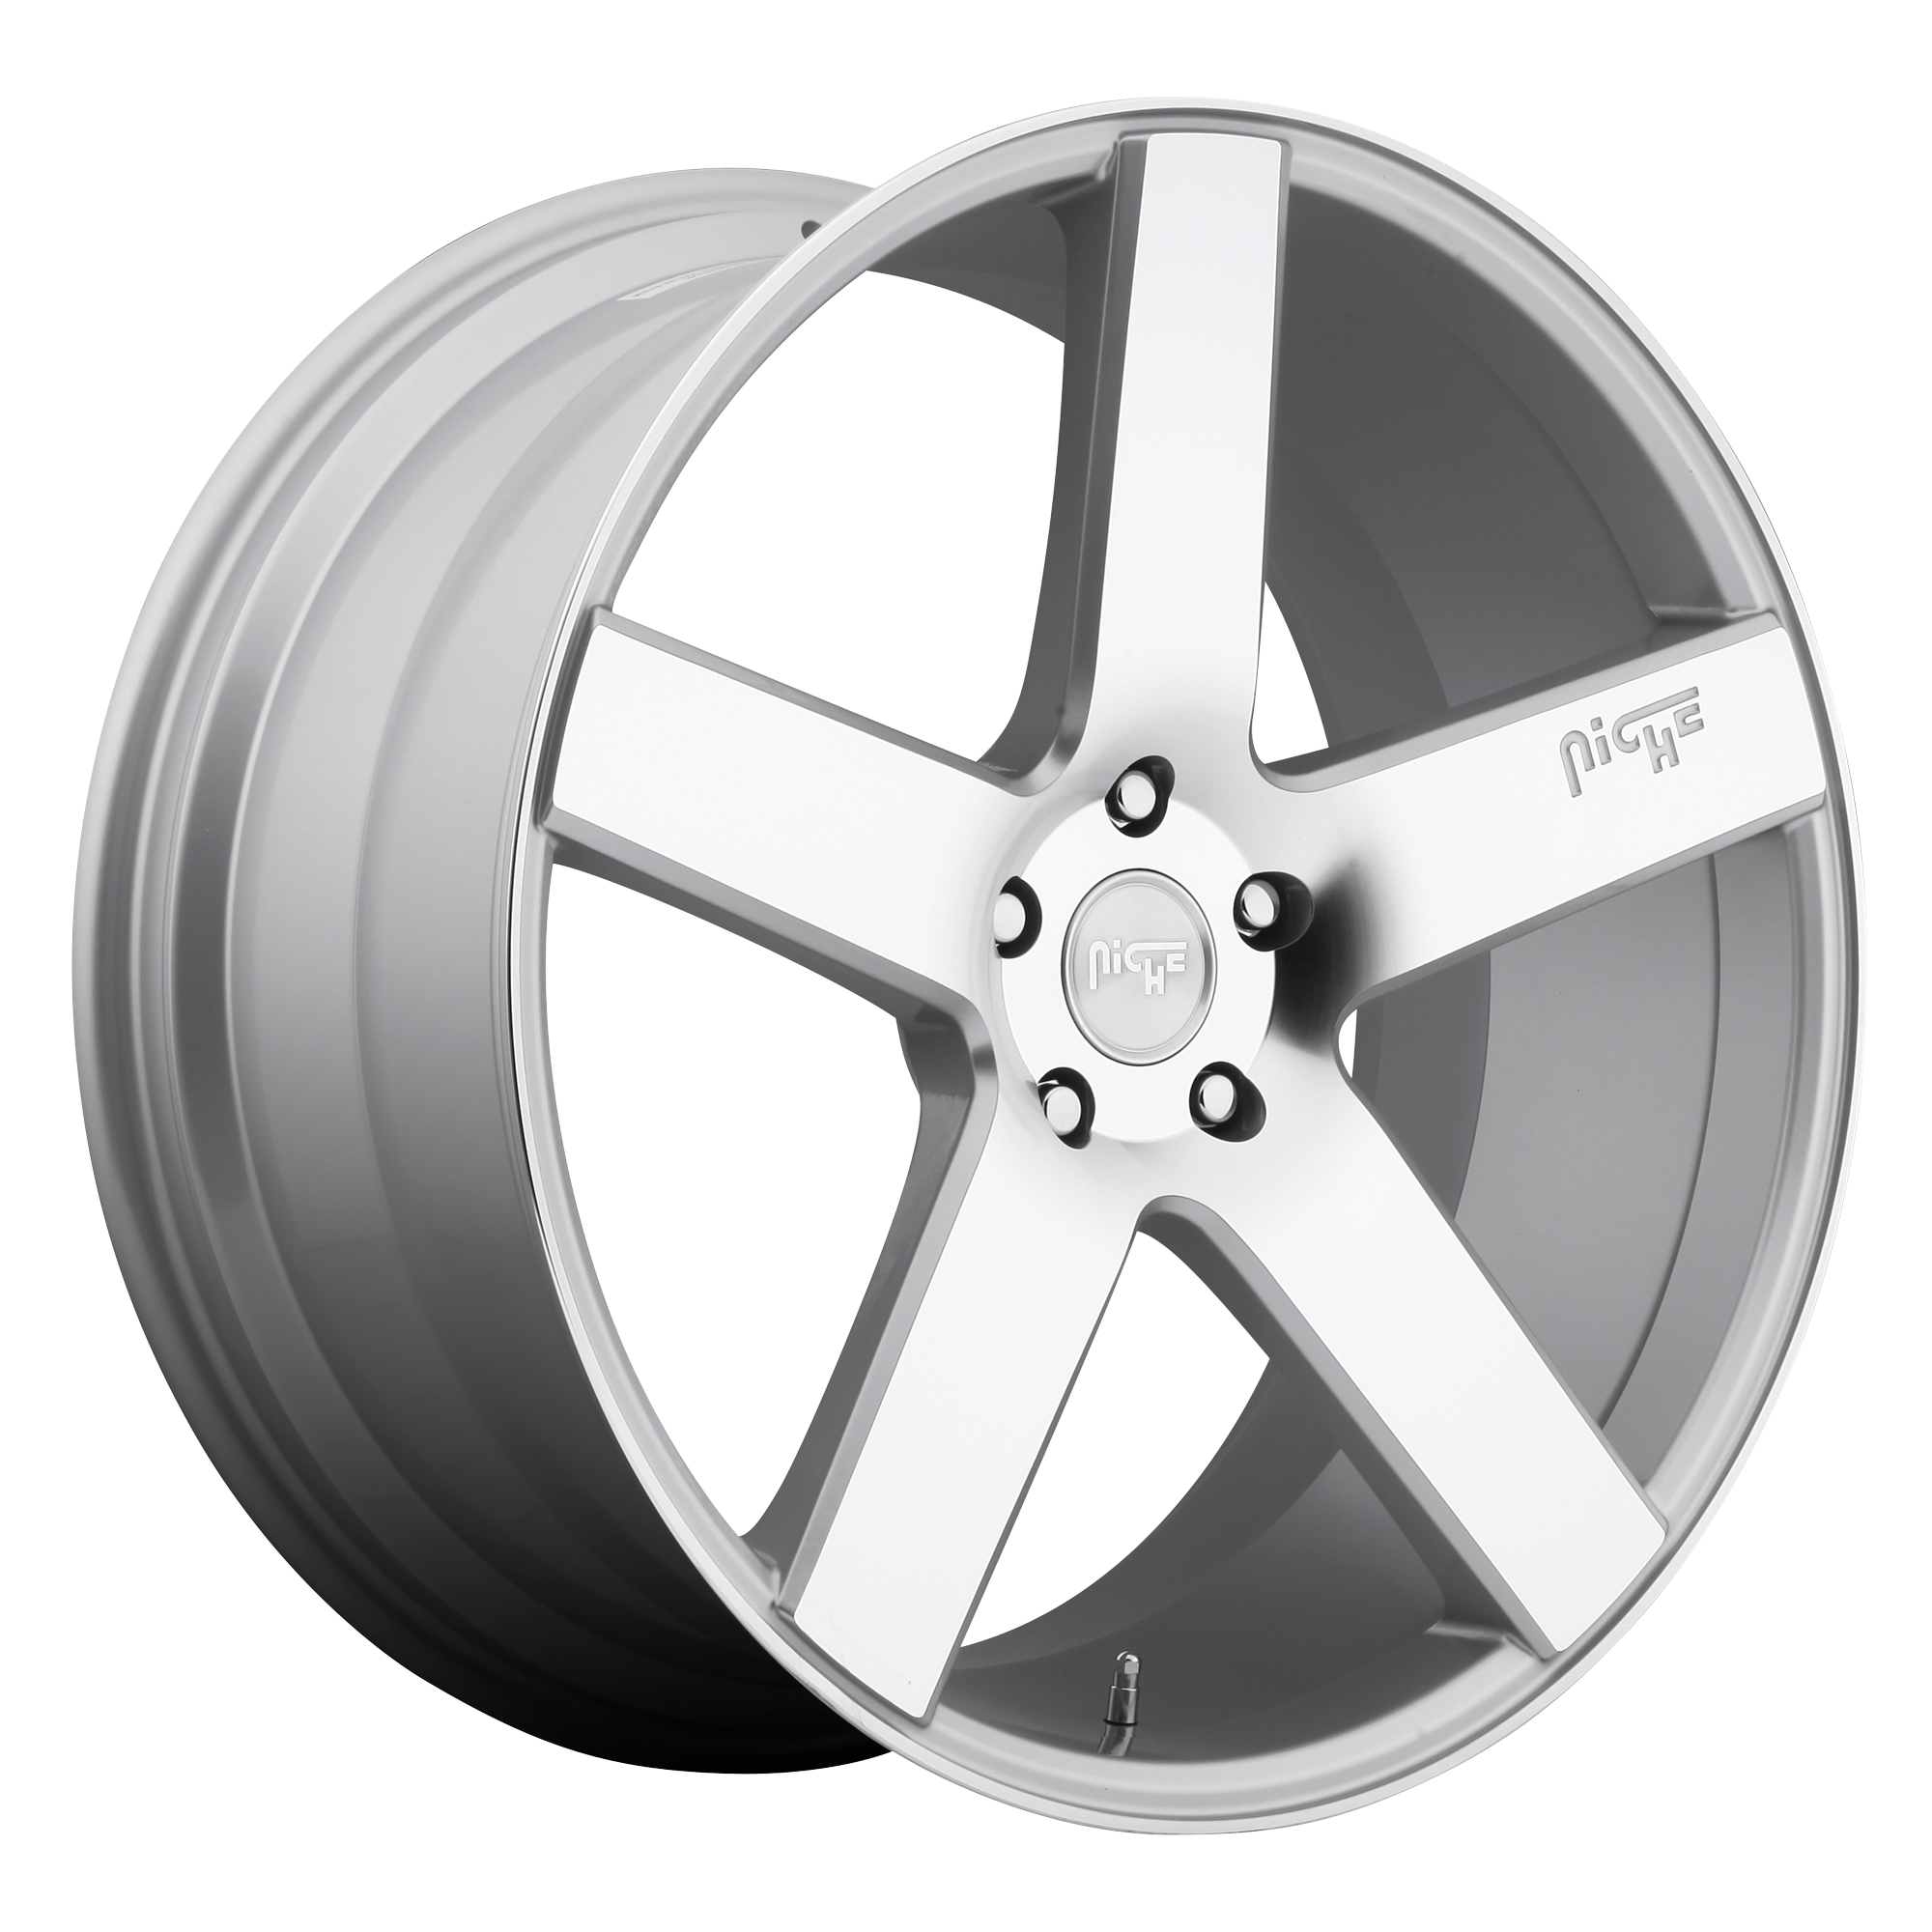 MILAN 19x8.5 5x114.30 GLOSS SILVER MACHINED (35 mm) - Tires and Engine Performance